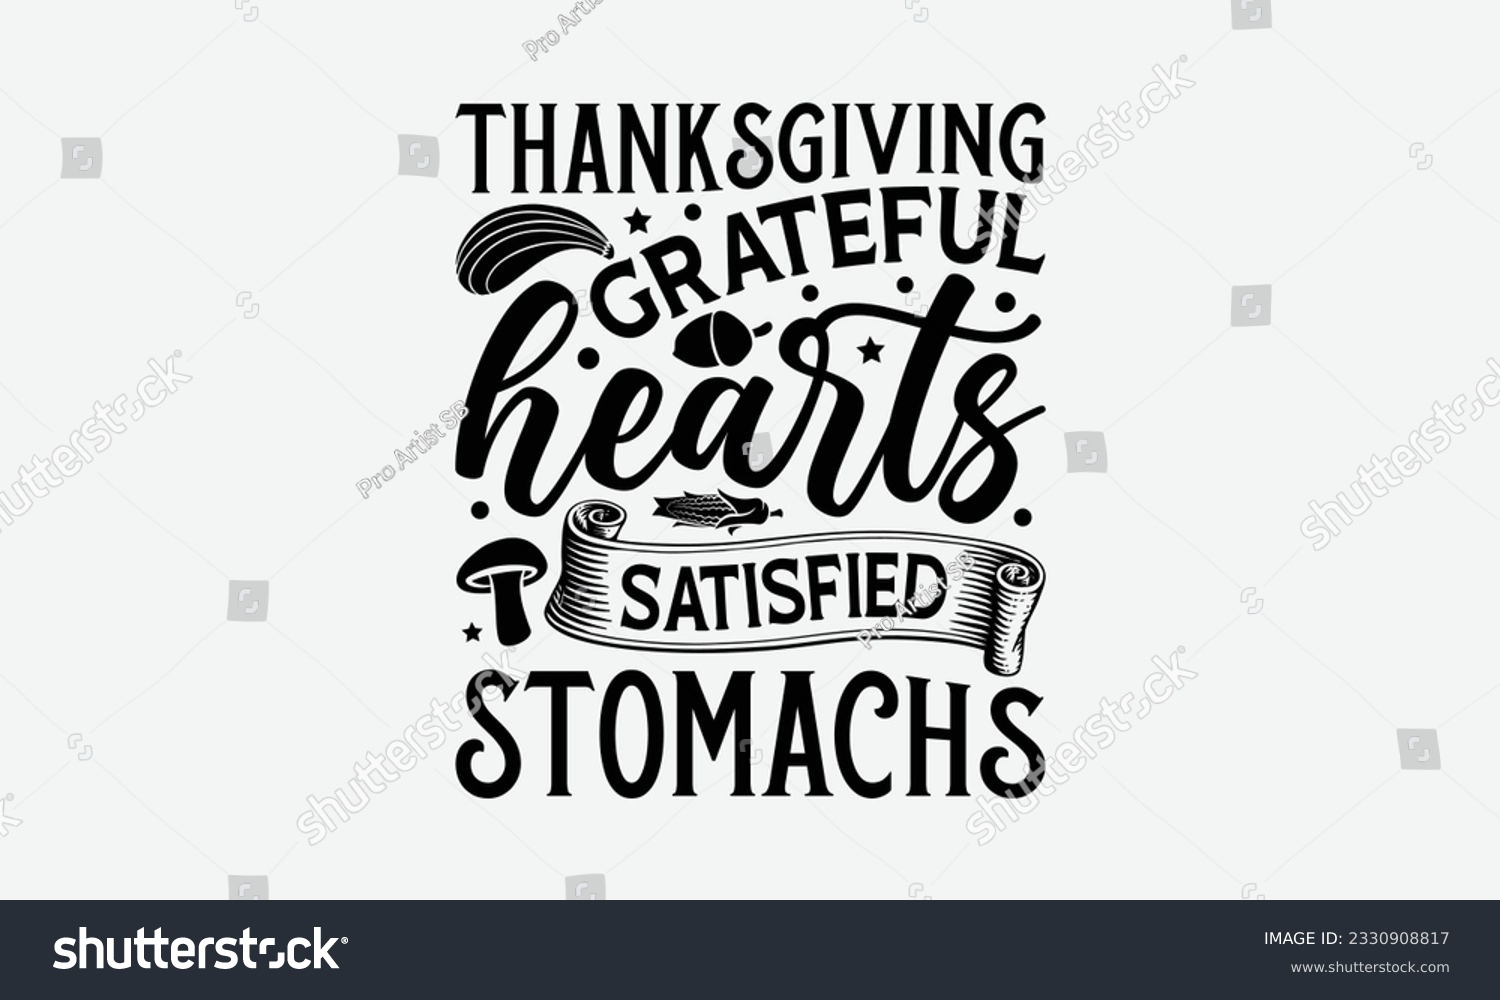 SVG of Thanksgiving Grateful Hearts Satisfied Stomachs - Thanksgiving T-shirt Design Template, Thanksgiving Quotes File, Hand Drawn Lettering Phrase, SVG Files for Cutting Cricut and Silhouette. svg